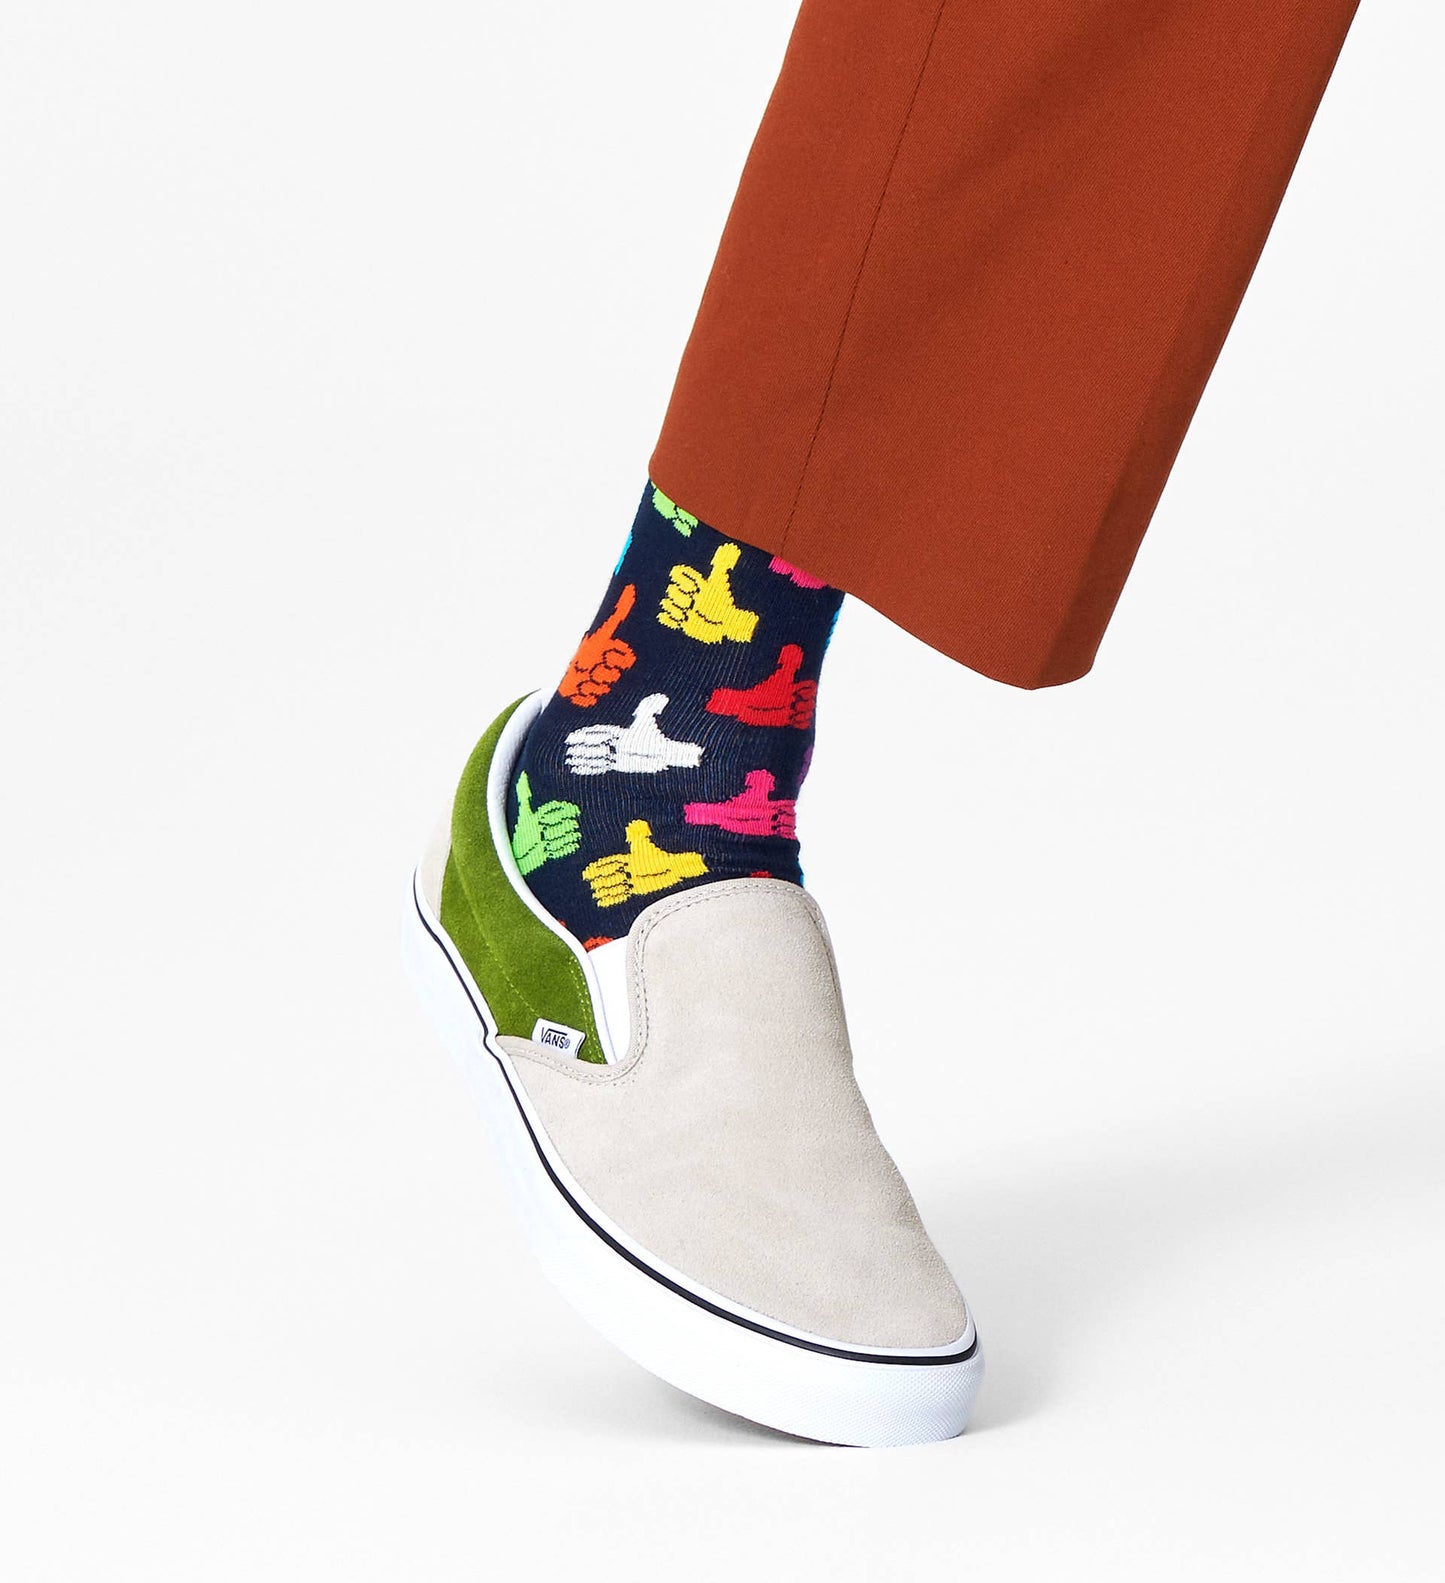 Happy Sock THU01-6500 Thumbs Up Sock - Dark navy cotton crew socks with multicoloured thumbs up pattern.